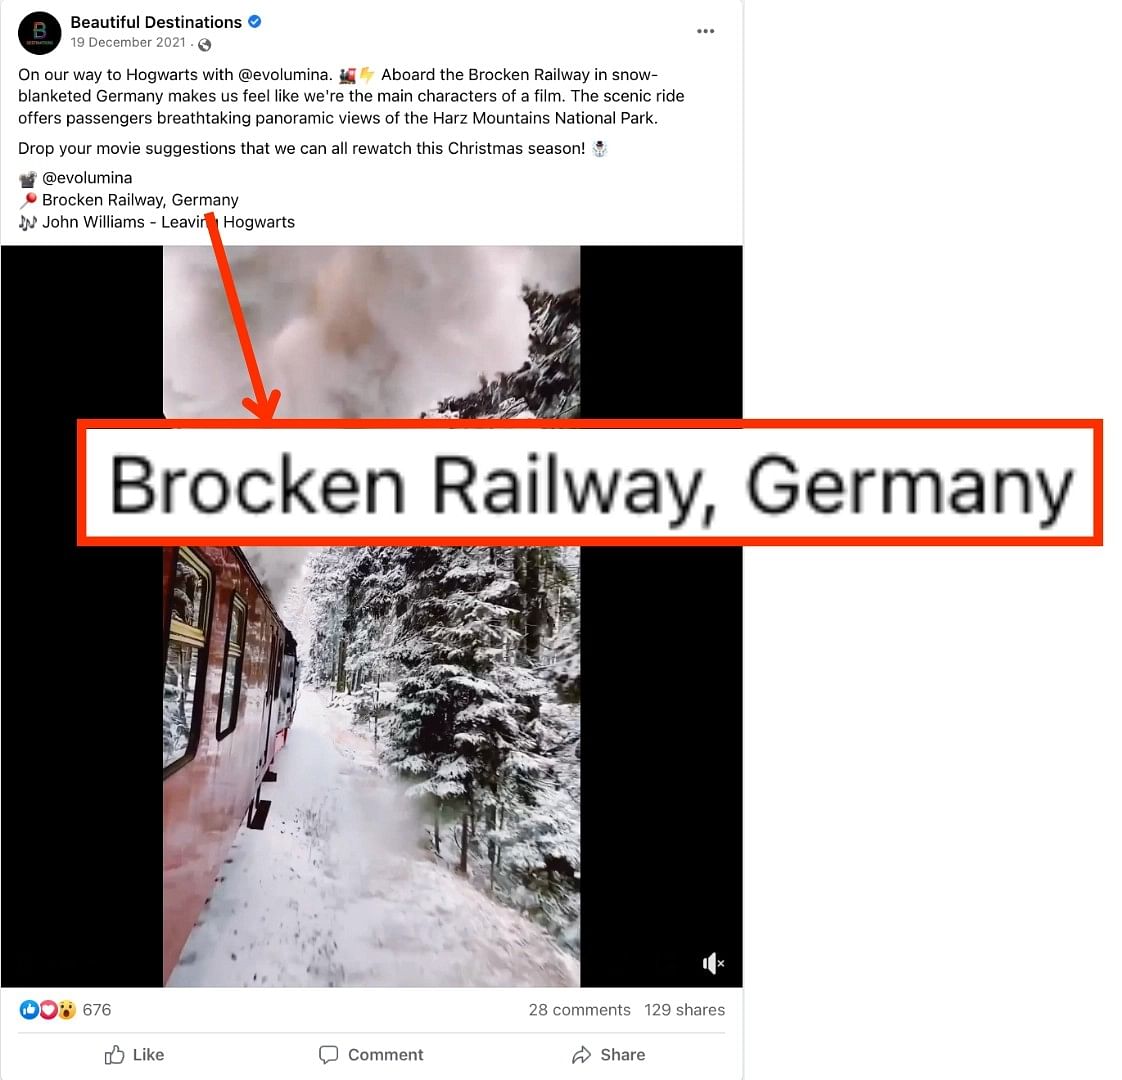 The video shows the Brocken Railway in Germany's Harz Mountains area.